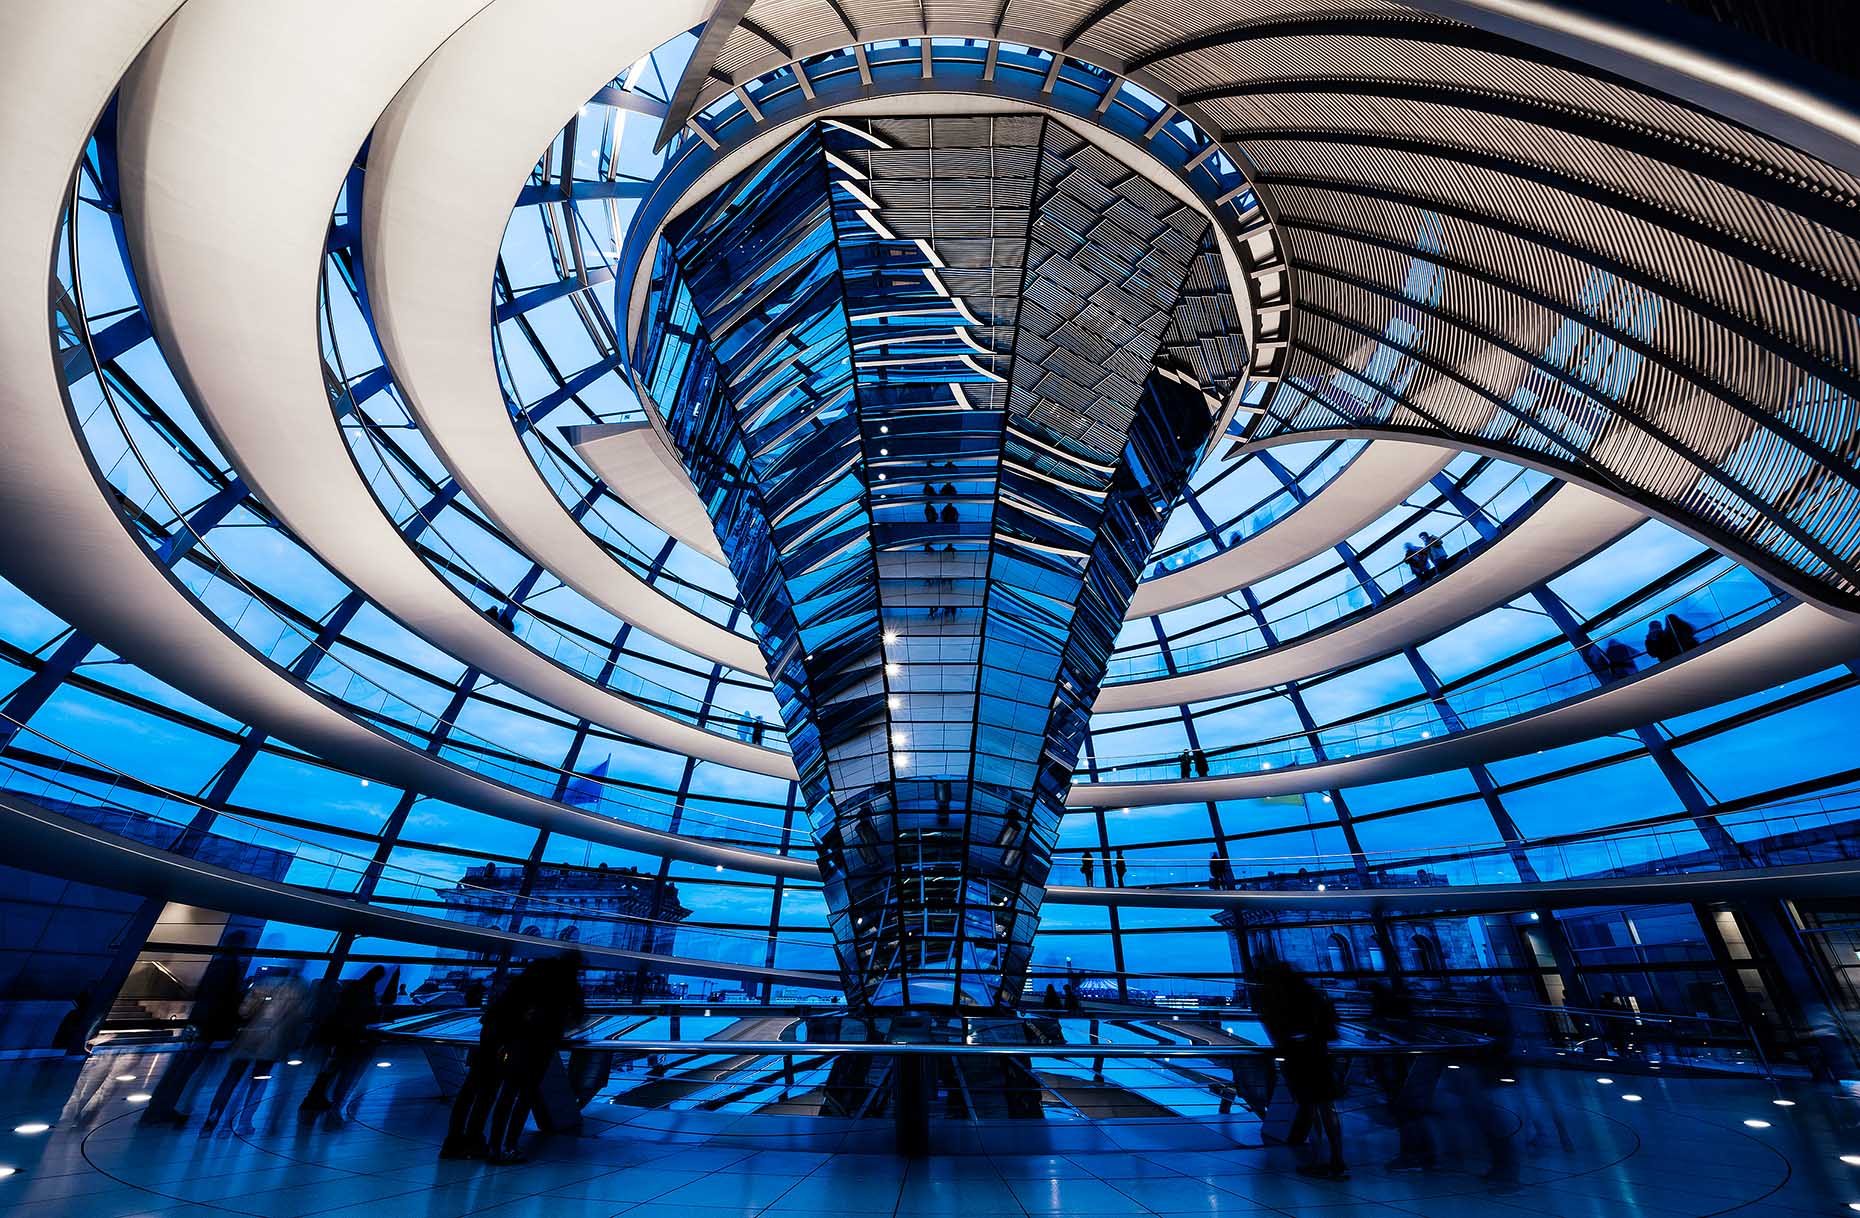 interior-view-reichstag-berlin-parliament-norman-foster-germany-architecture-02a